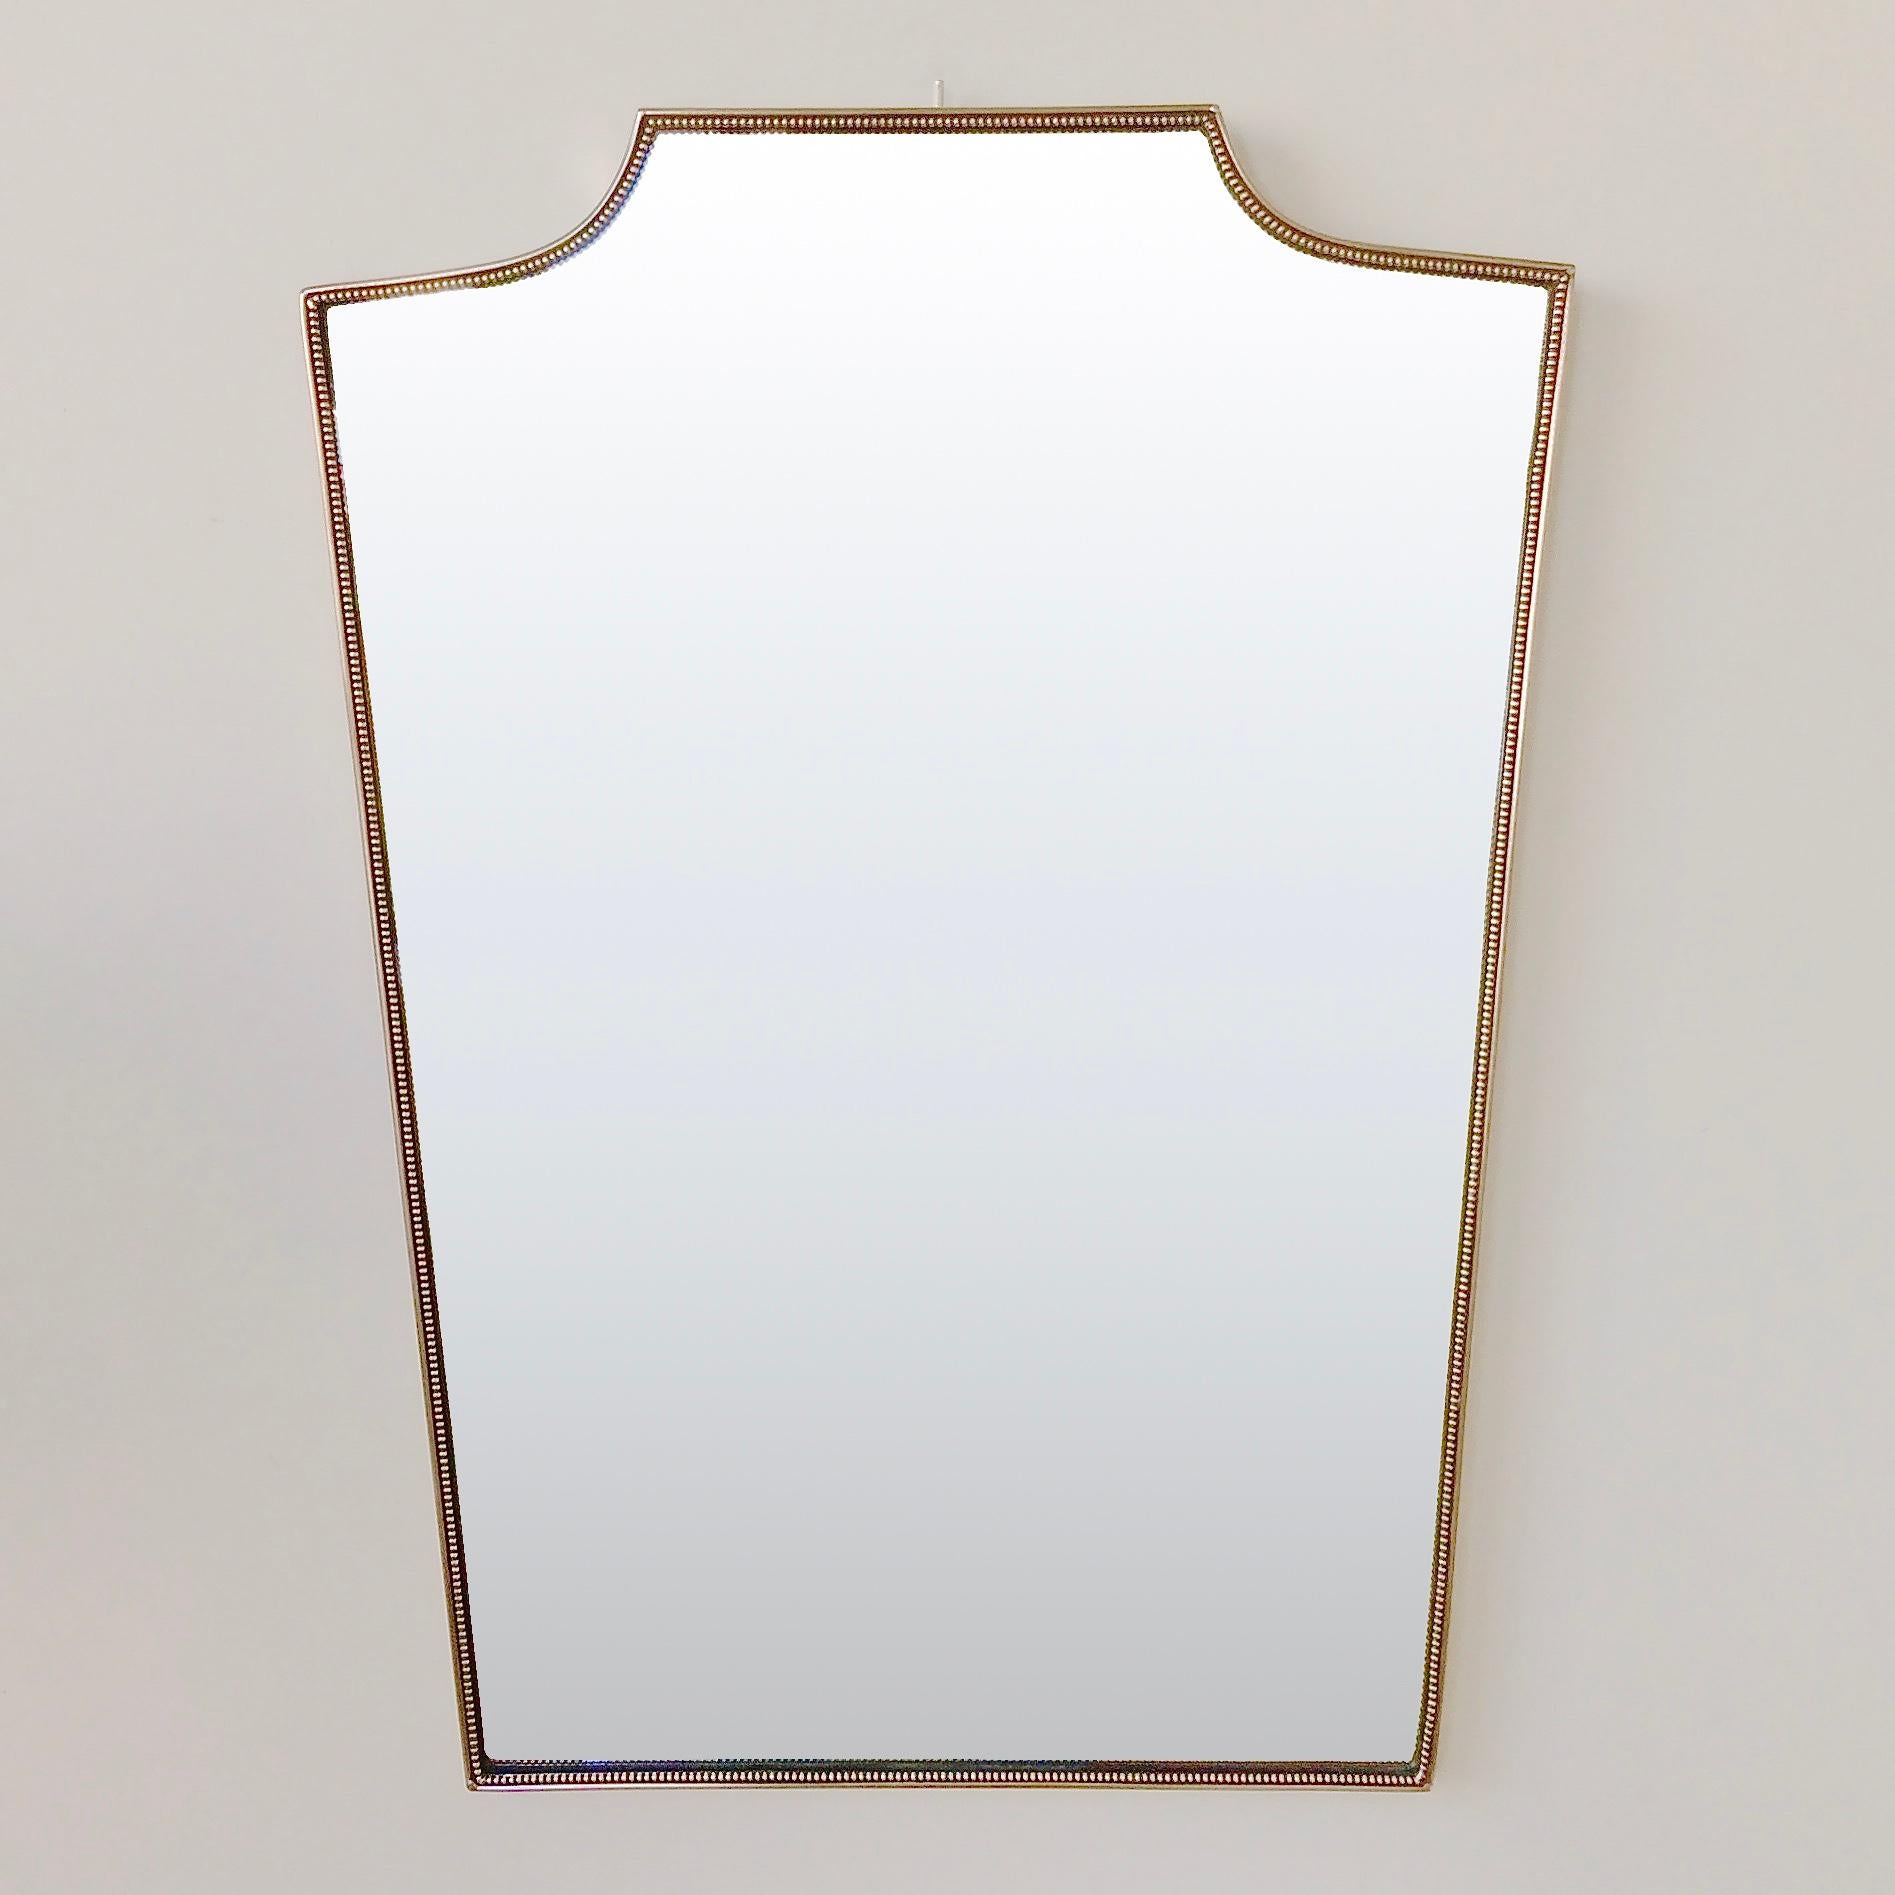 Elegant decorative mid-century wall mirror, circa 1950, Italy.
Polished brass.
Dimensions: 81 cm H, 59 cm W, 3 cm D.
Good original condition.
All purchases are covered by our buyer protection guarantee.
This item can be returned within 14 days